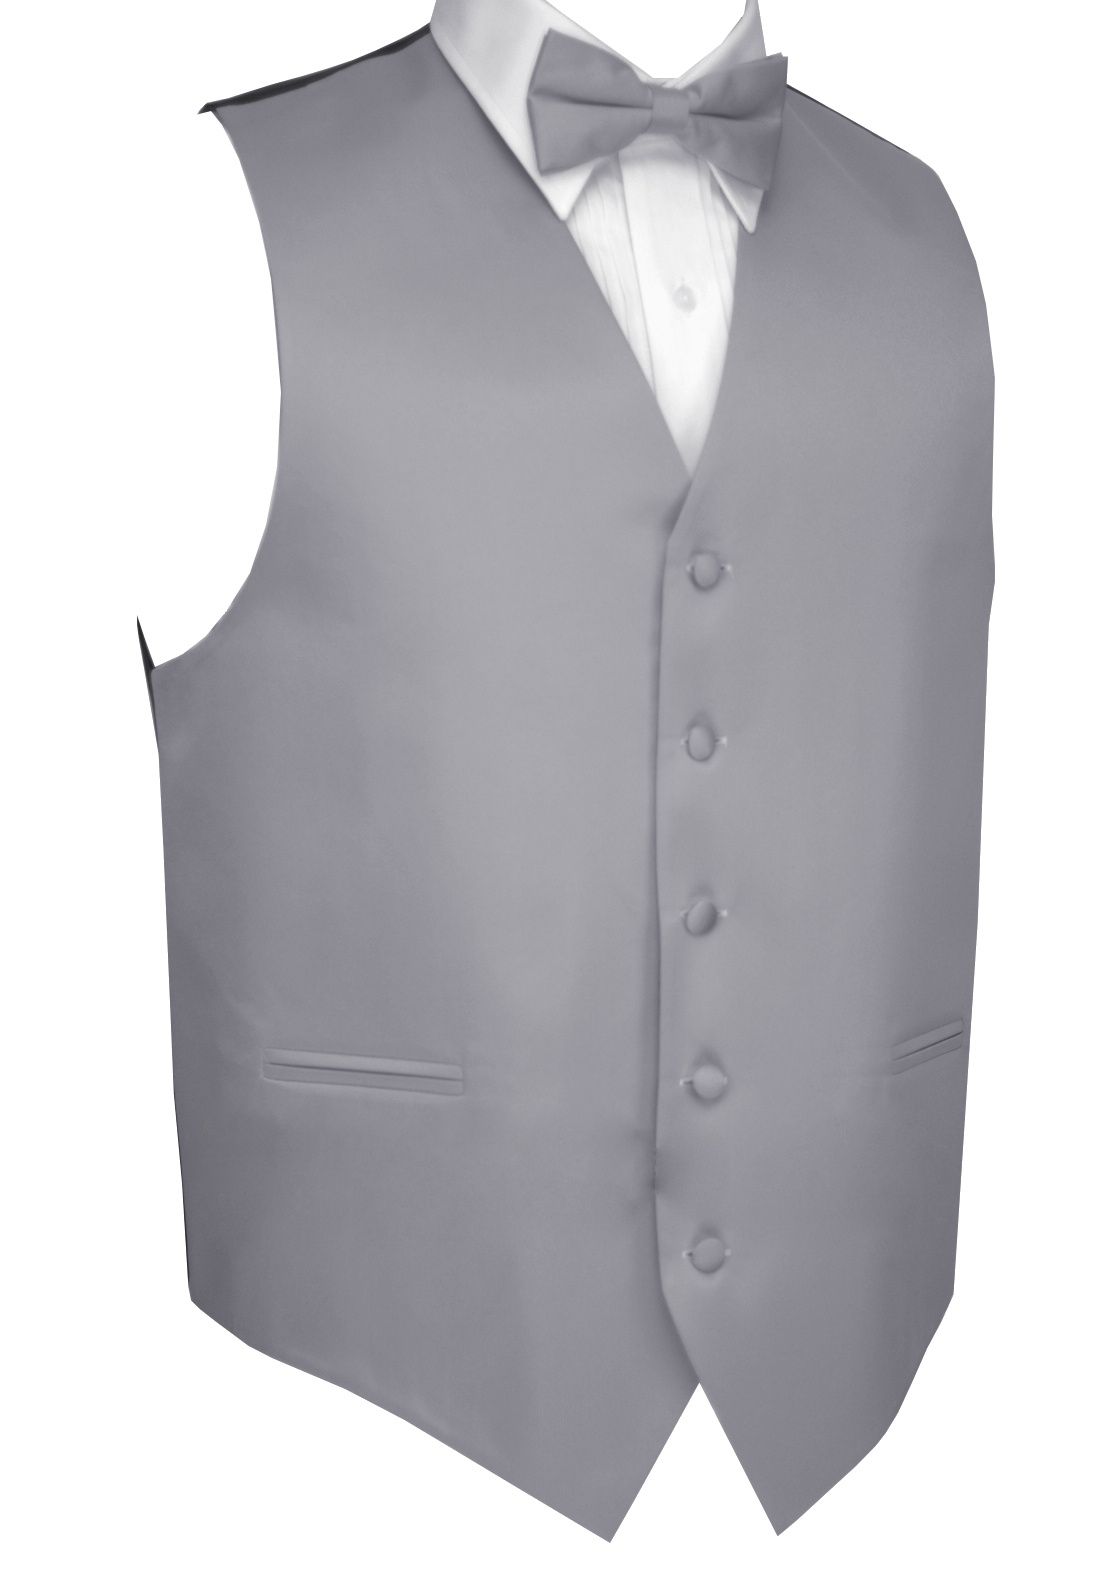 Neil Allyn 7-Piece Formal Tuxedo with Pleated Front Pants, Shirt, Silver Vest, Bow-Tie & Cuff Links. Prom, Wedding, Cruise - image 4 of 5